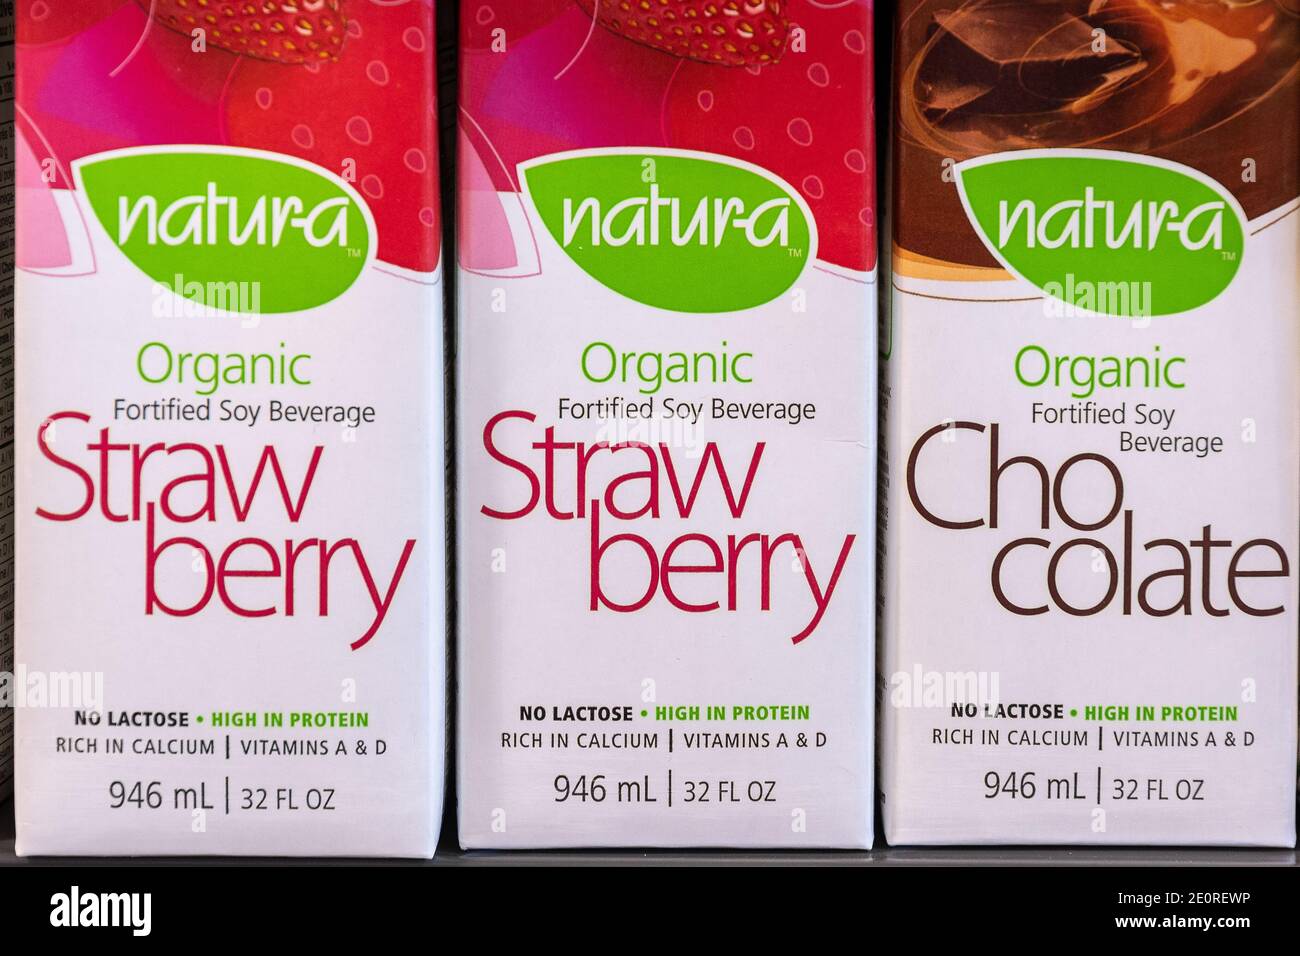 Boxes of Natura branded beverages with strawberry and chocolate flavors.   The merchandise is seen on a supermarket shelf. There are no people in the c Stock Photo